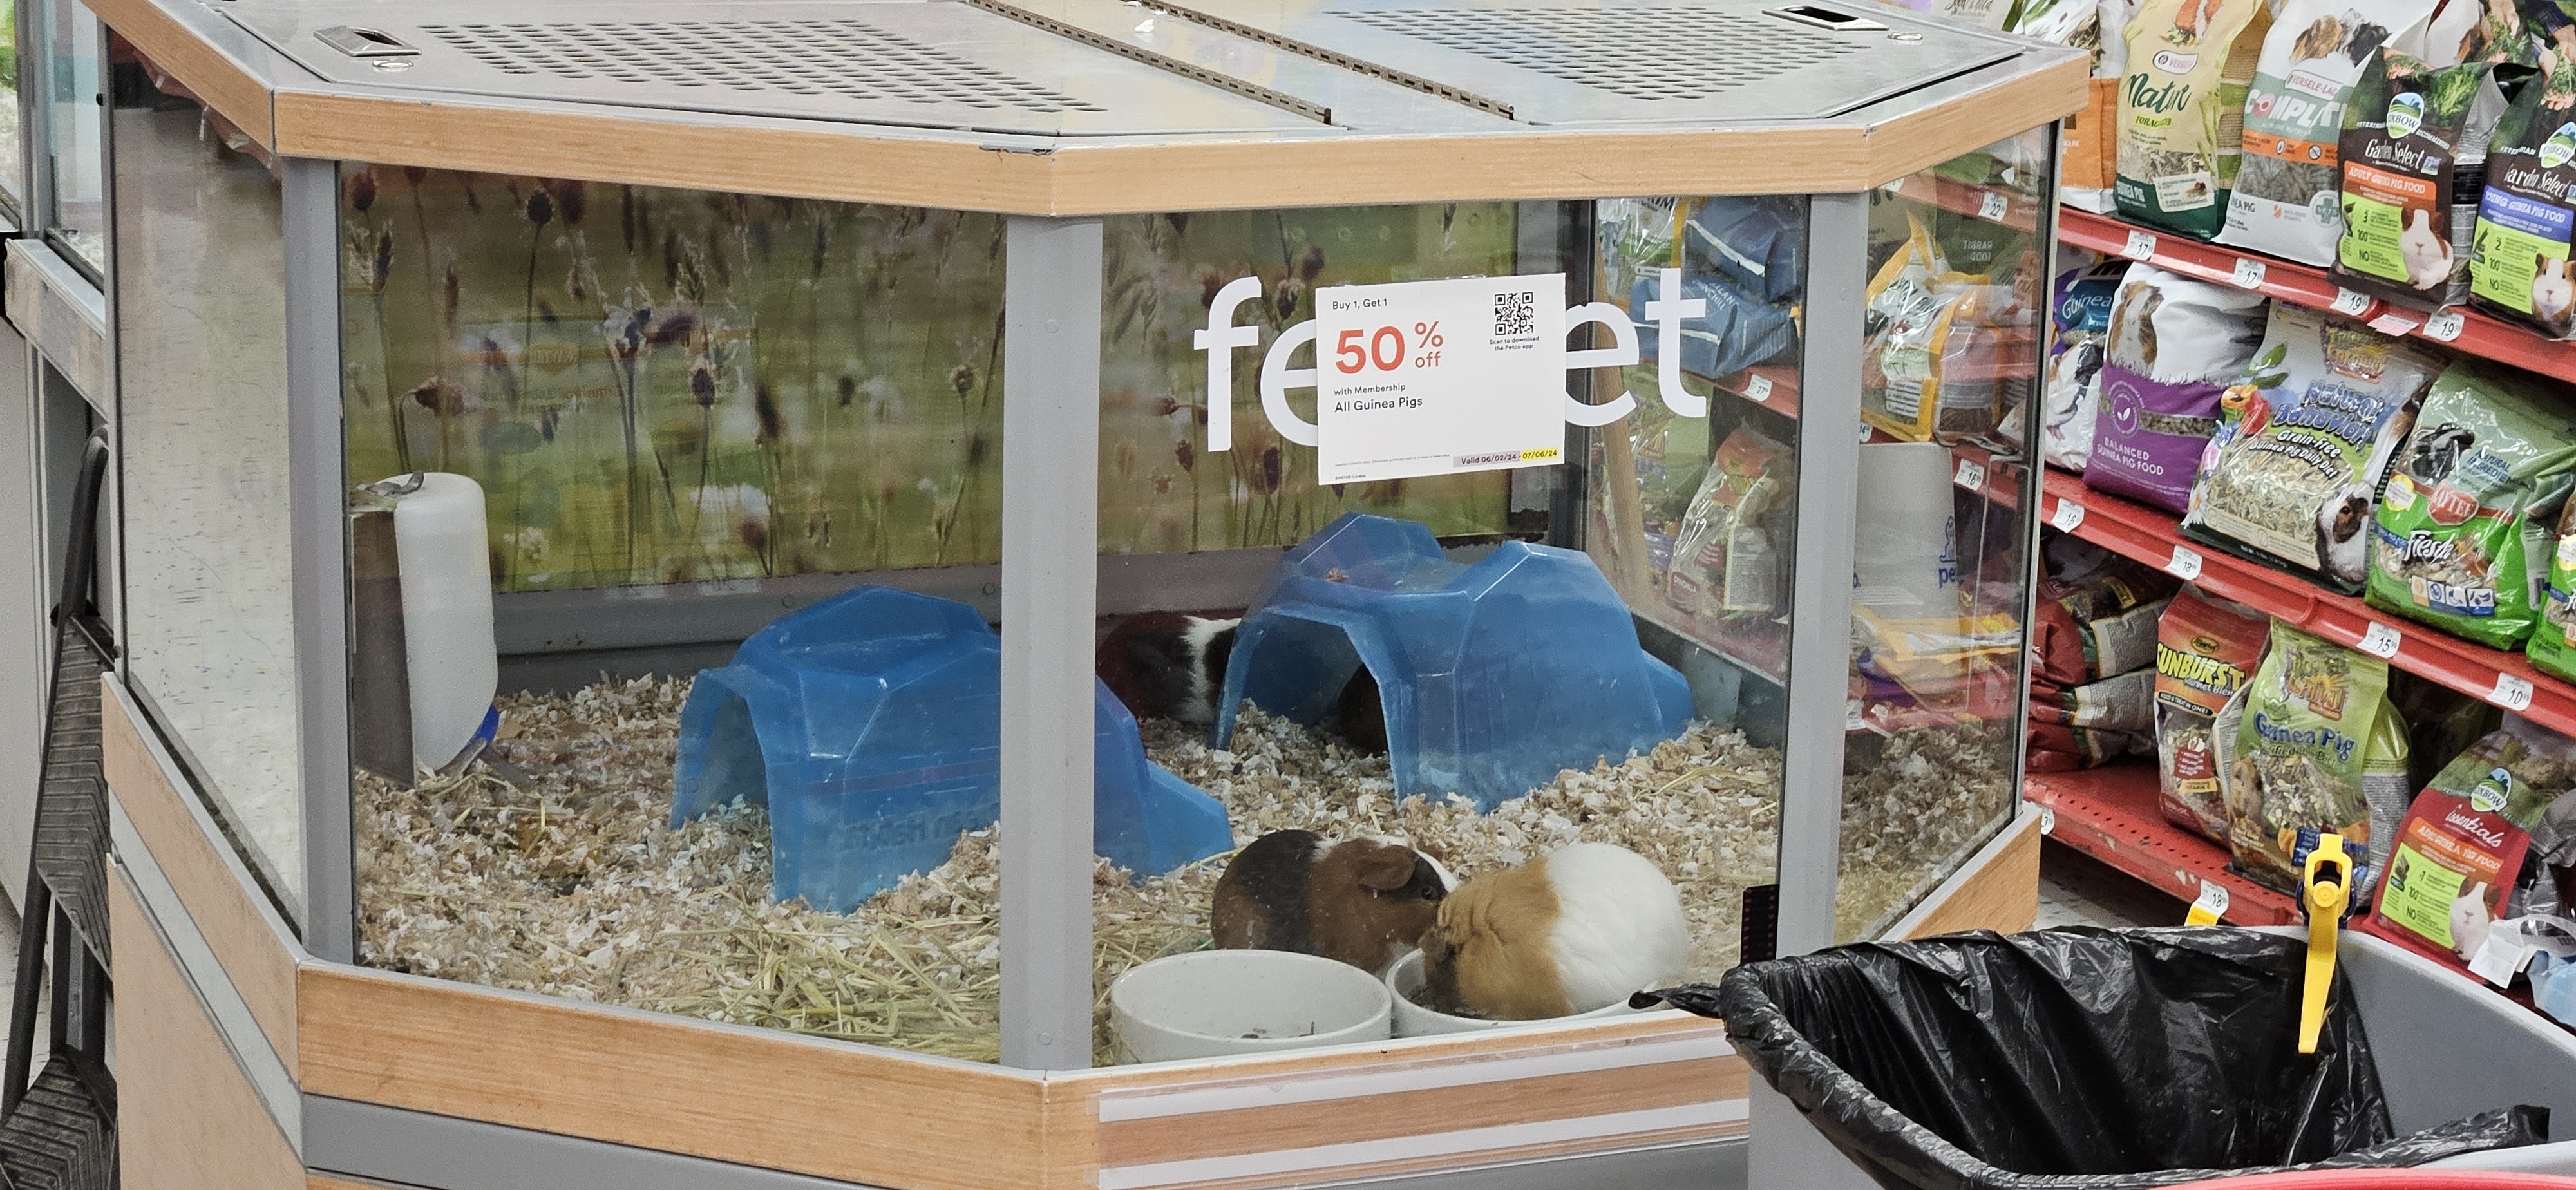 5 guinea pigs in the PetCo ferret cage. There's a Buy One, Get One 50% off sticker over the FERRET label.